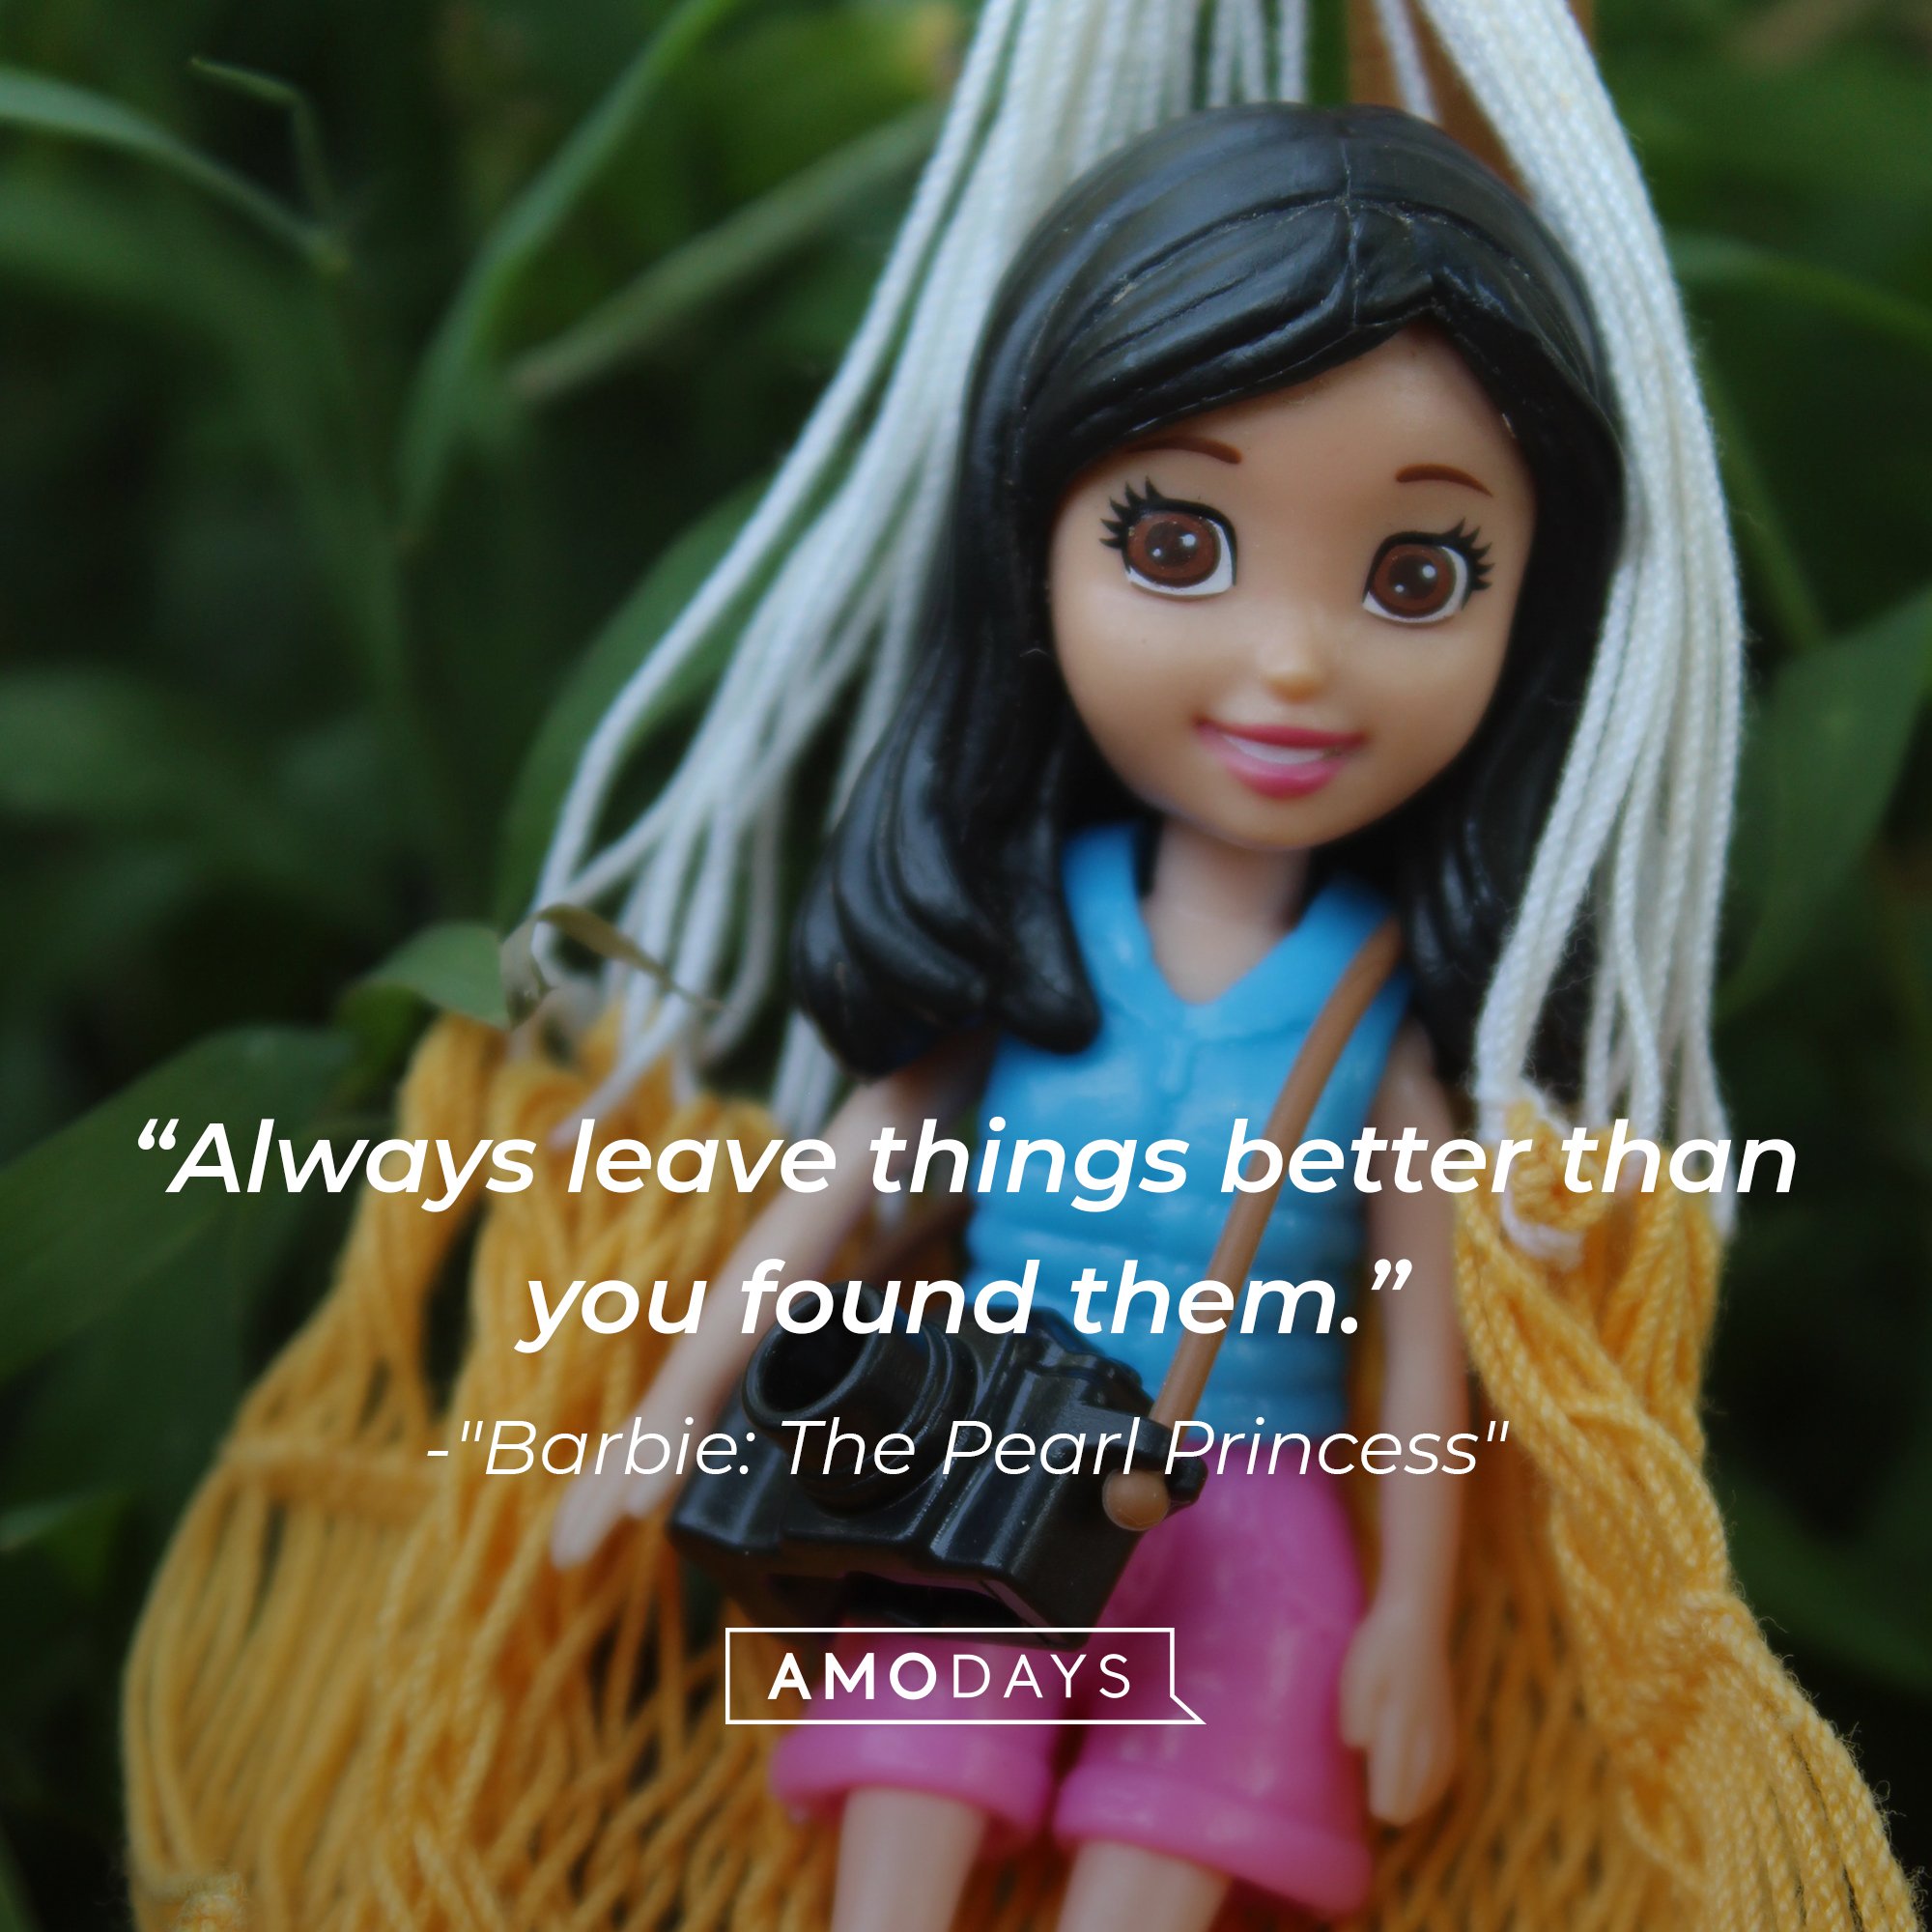 "Barbie: The Pearl Princess'" quote: "Always leave things better than you found them." | Image: AmoDays